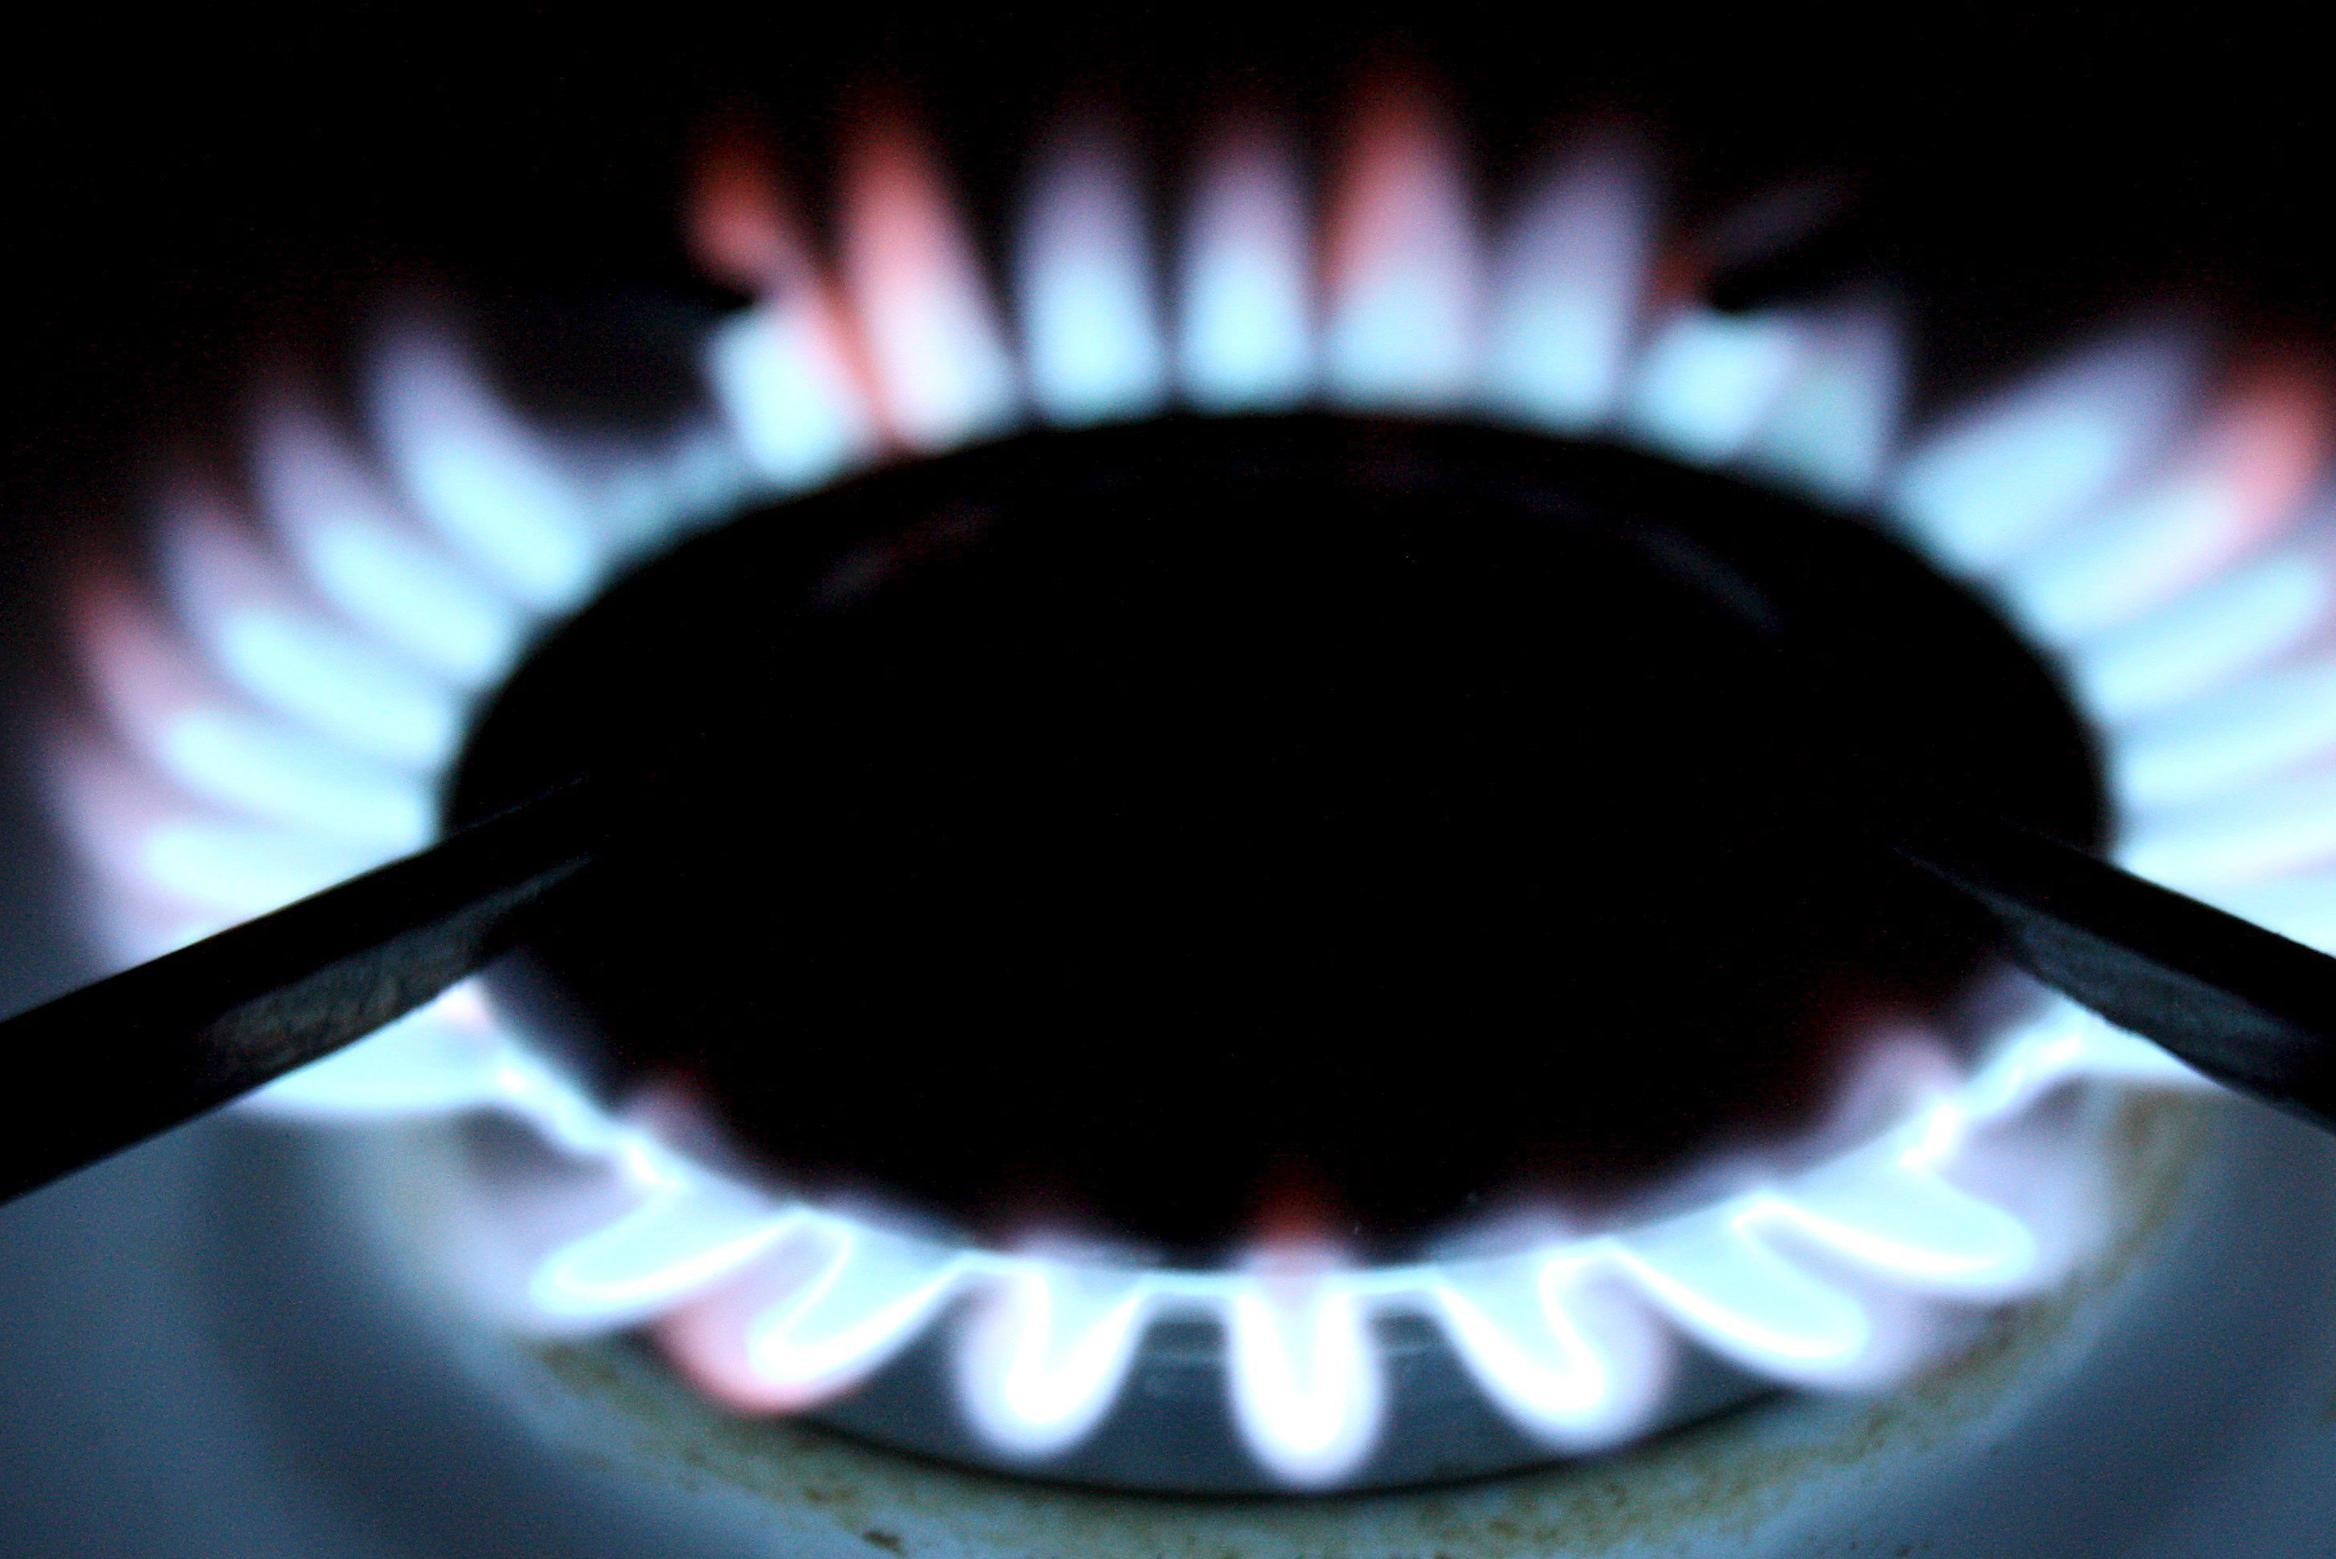 European gas price drops to lowest level in three months